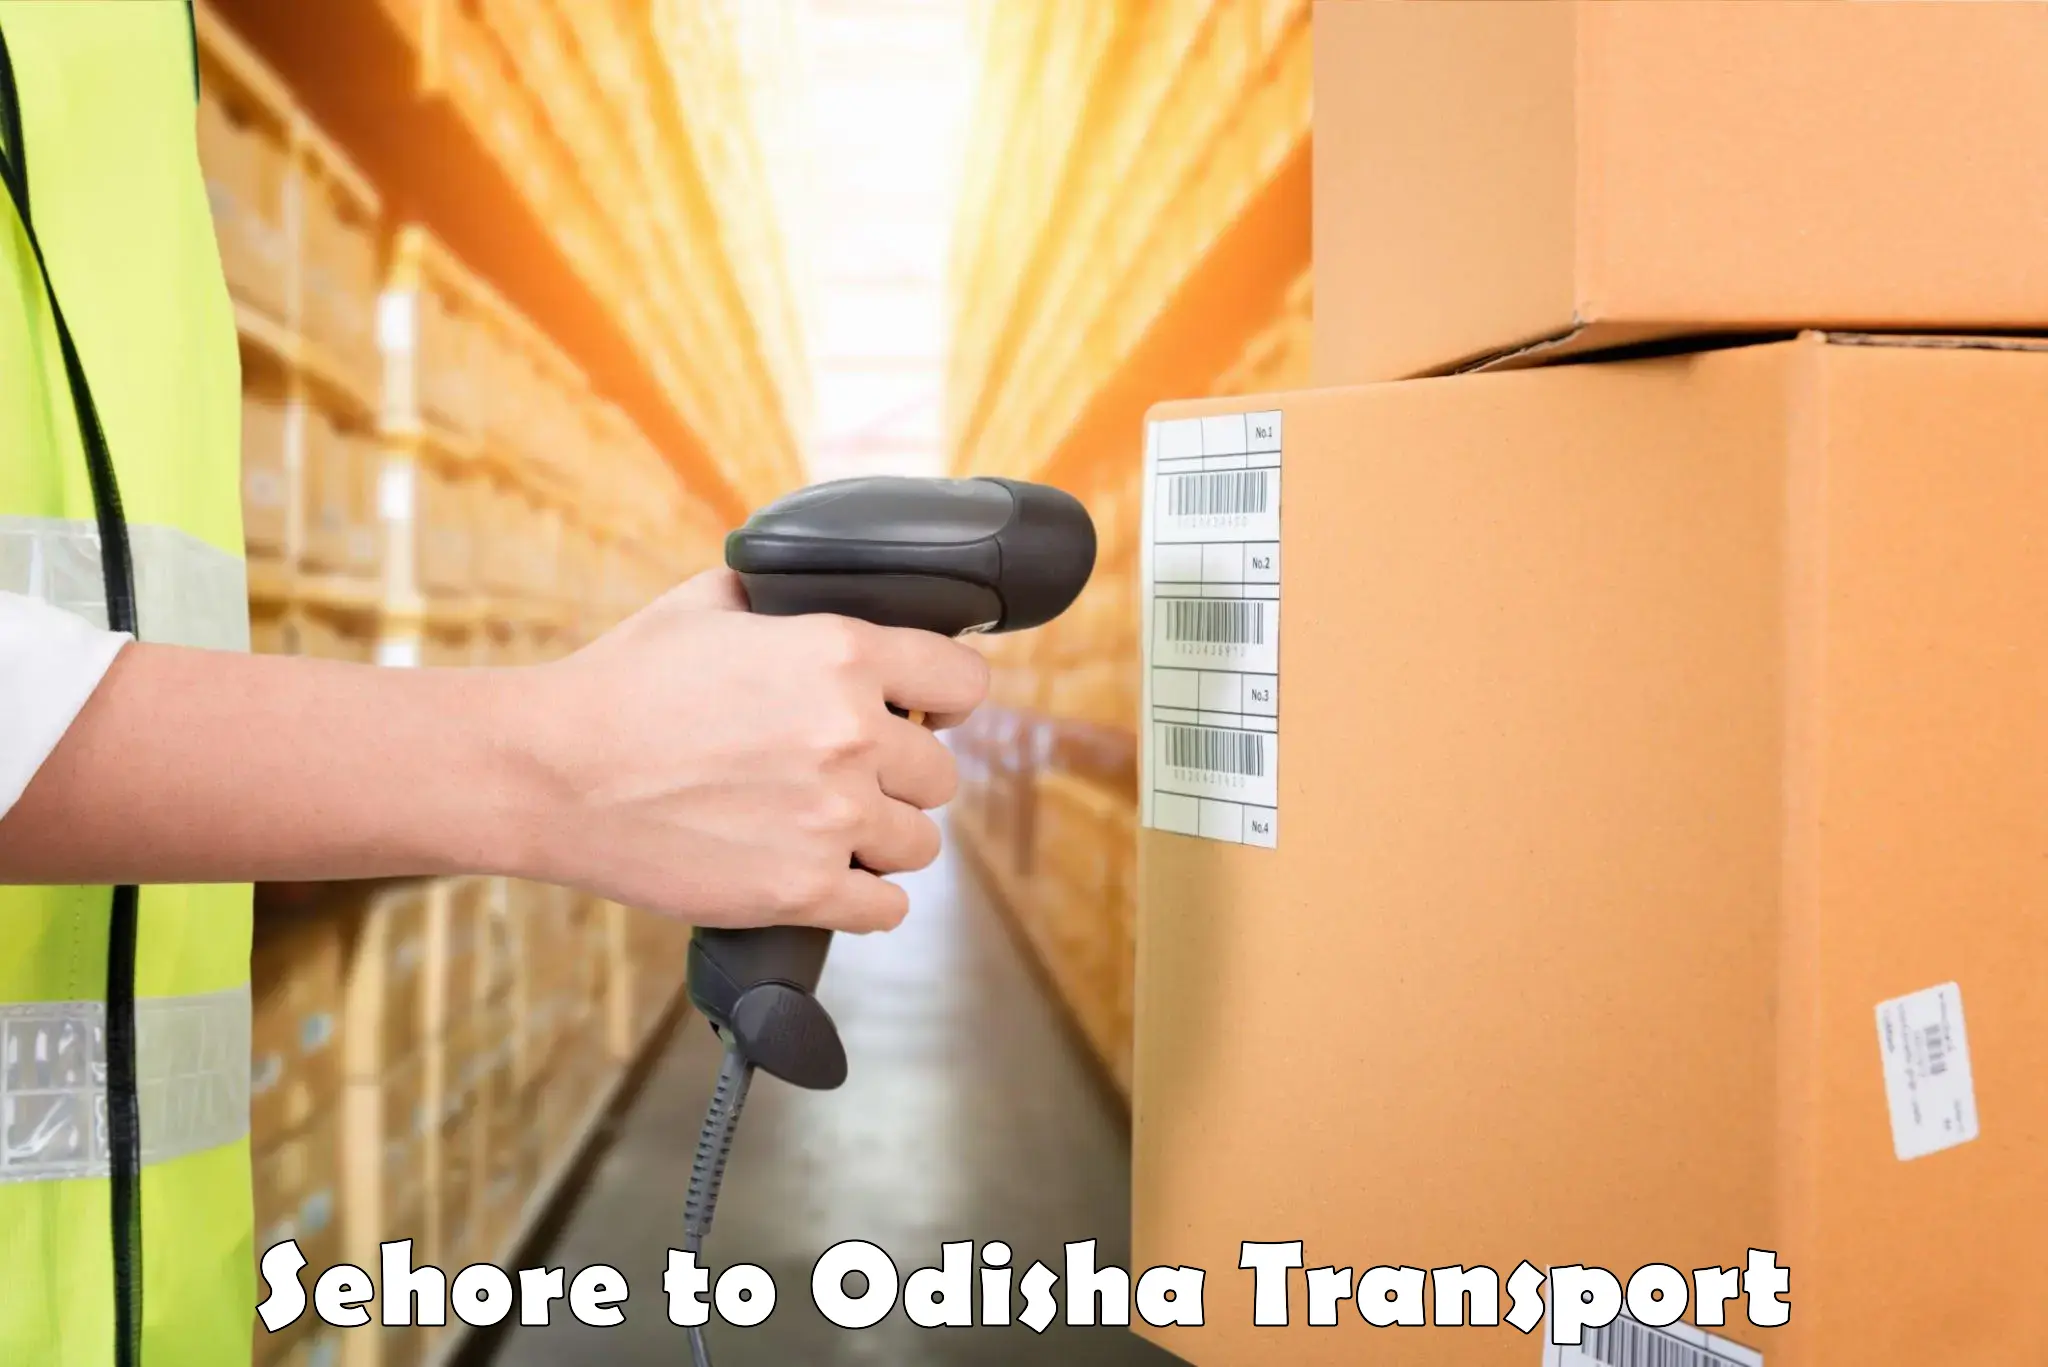 Transport in sharing Sehore to Odisha